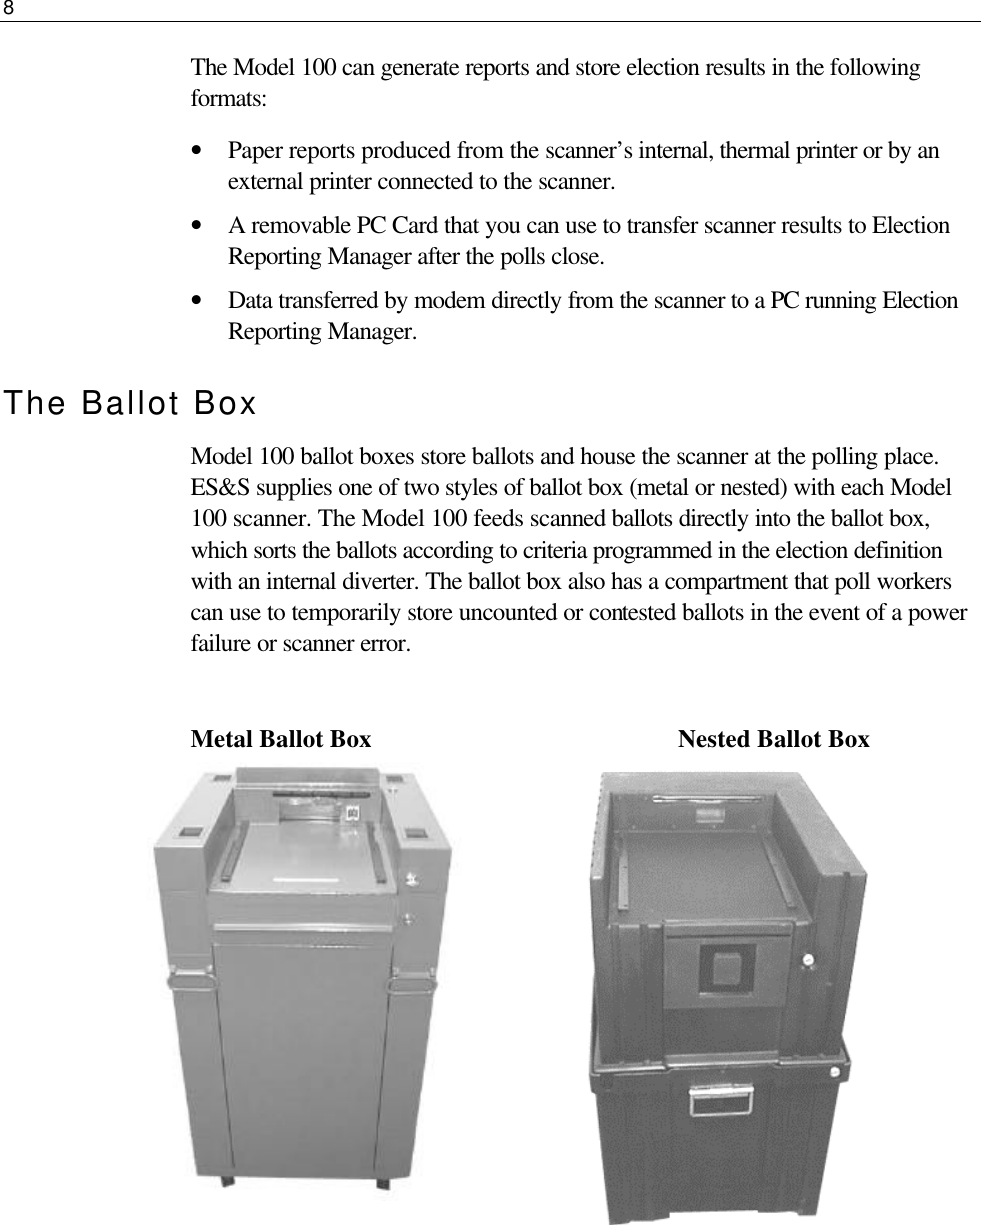 8  The Model 100 can generate reports and store election results in the following formats: • Paper reports produced from the scanner’s internal, thermal printer or by an external printer connected to the scanner. • A removable PC Card that you can use to transfer scanner results to Election Reporting Manager after the polls close. • Data transferred by modem directly from the scanner to a PC running Election Reporting Manager. The Ballot Box Model 100 ballot boxes store ballots and house the scanner at the polling place. ES&amp;S supplies one of two styles of ballot box (metal or nested) with each Model 100 scanner. The Model 100 feeds scanned ballots directly into the ballot box, which sorts the ballots according to criteria programmed in the election definition with an internal diverter. The ballot box also has a compartment that poll workers can use to temporarily store uncounted or contested ballots in the event of a power failure or scanner error.  Metal Ballot Box     Nested Ballot Box               